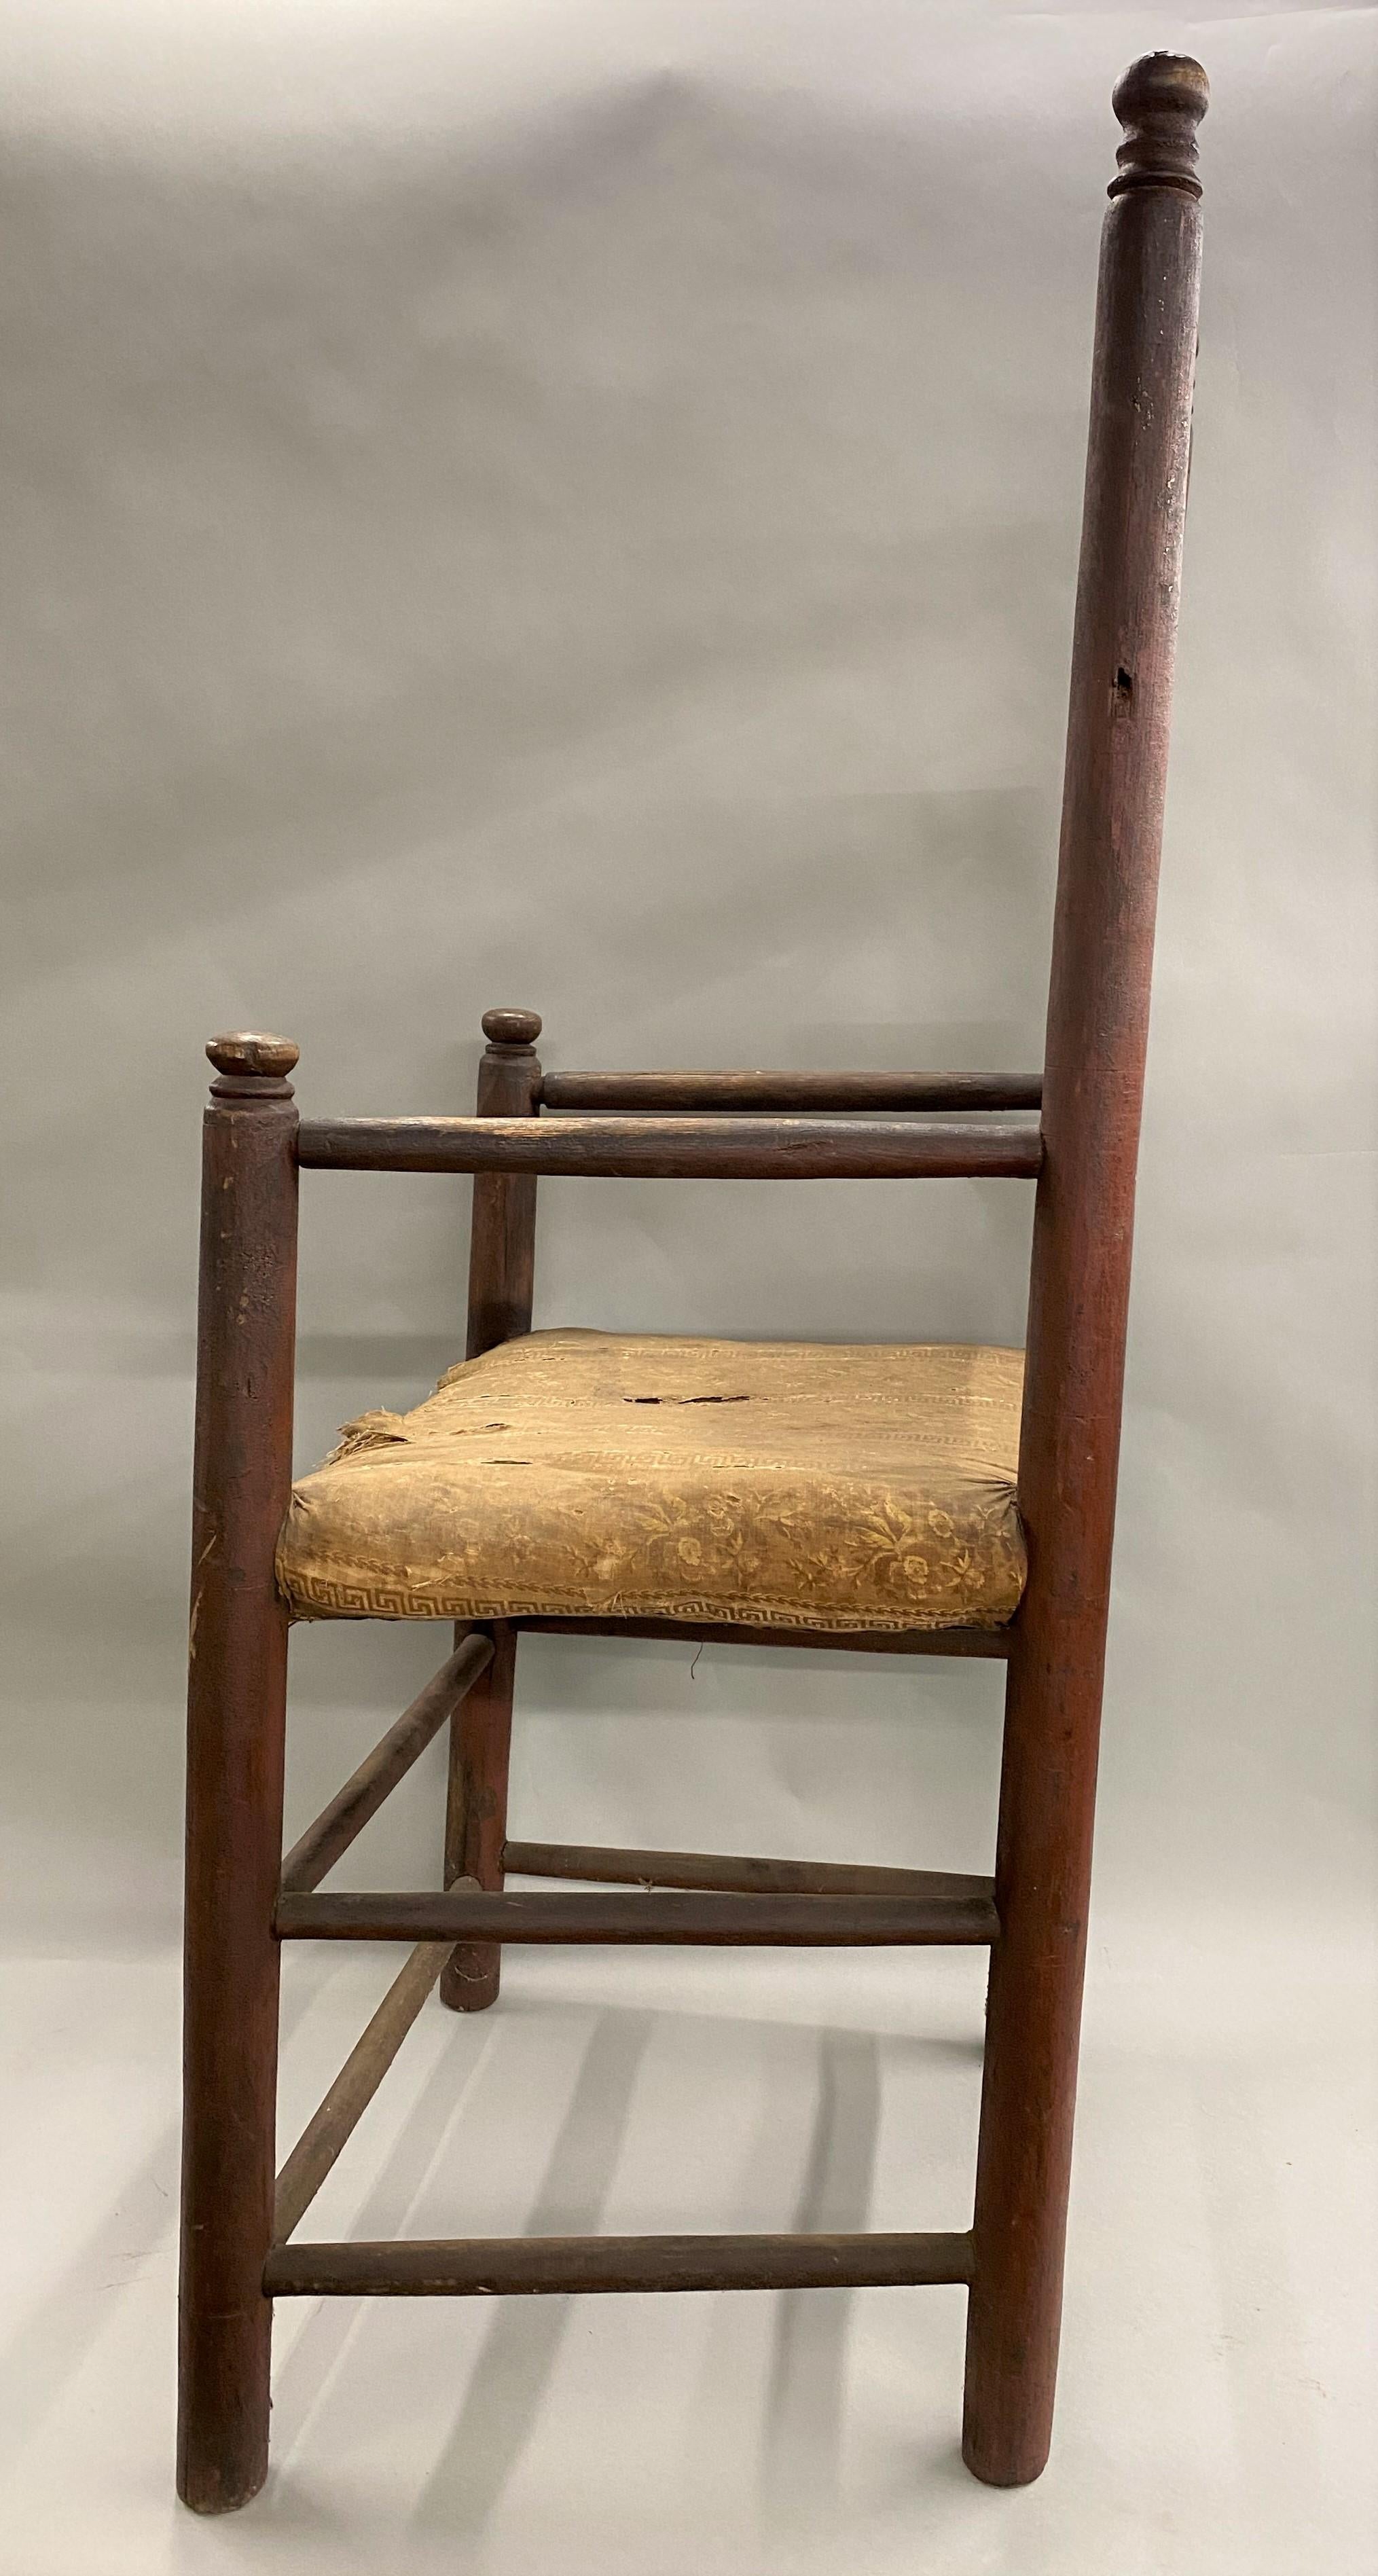 Wood 18th Century American Ladder Back Armchair in Old Crusty Red Paint For Sale